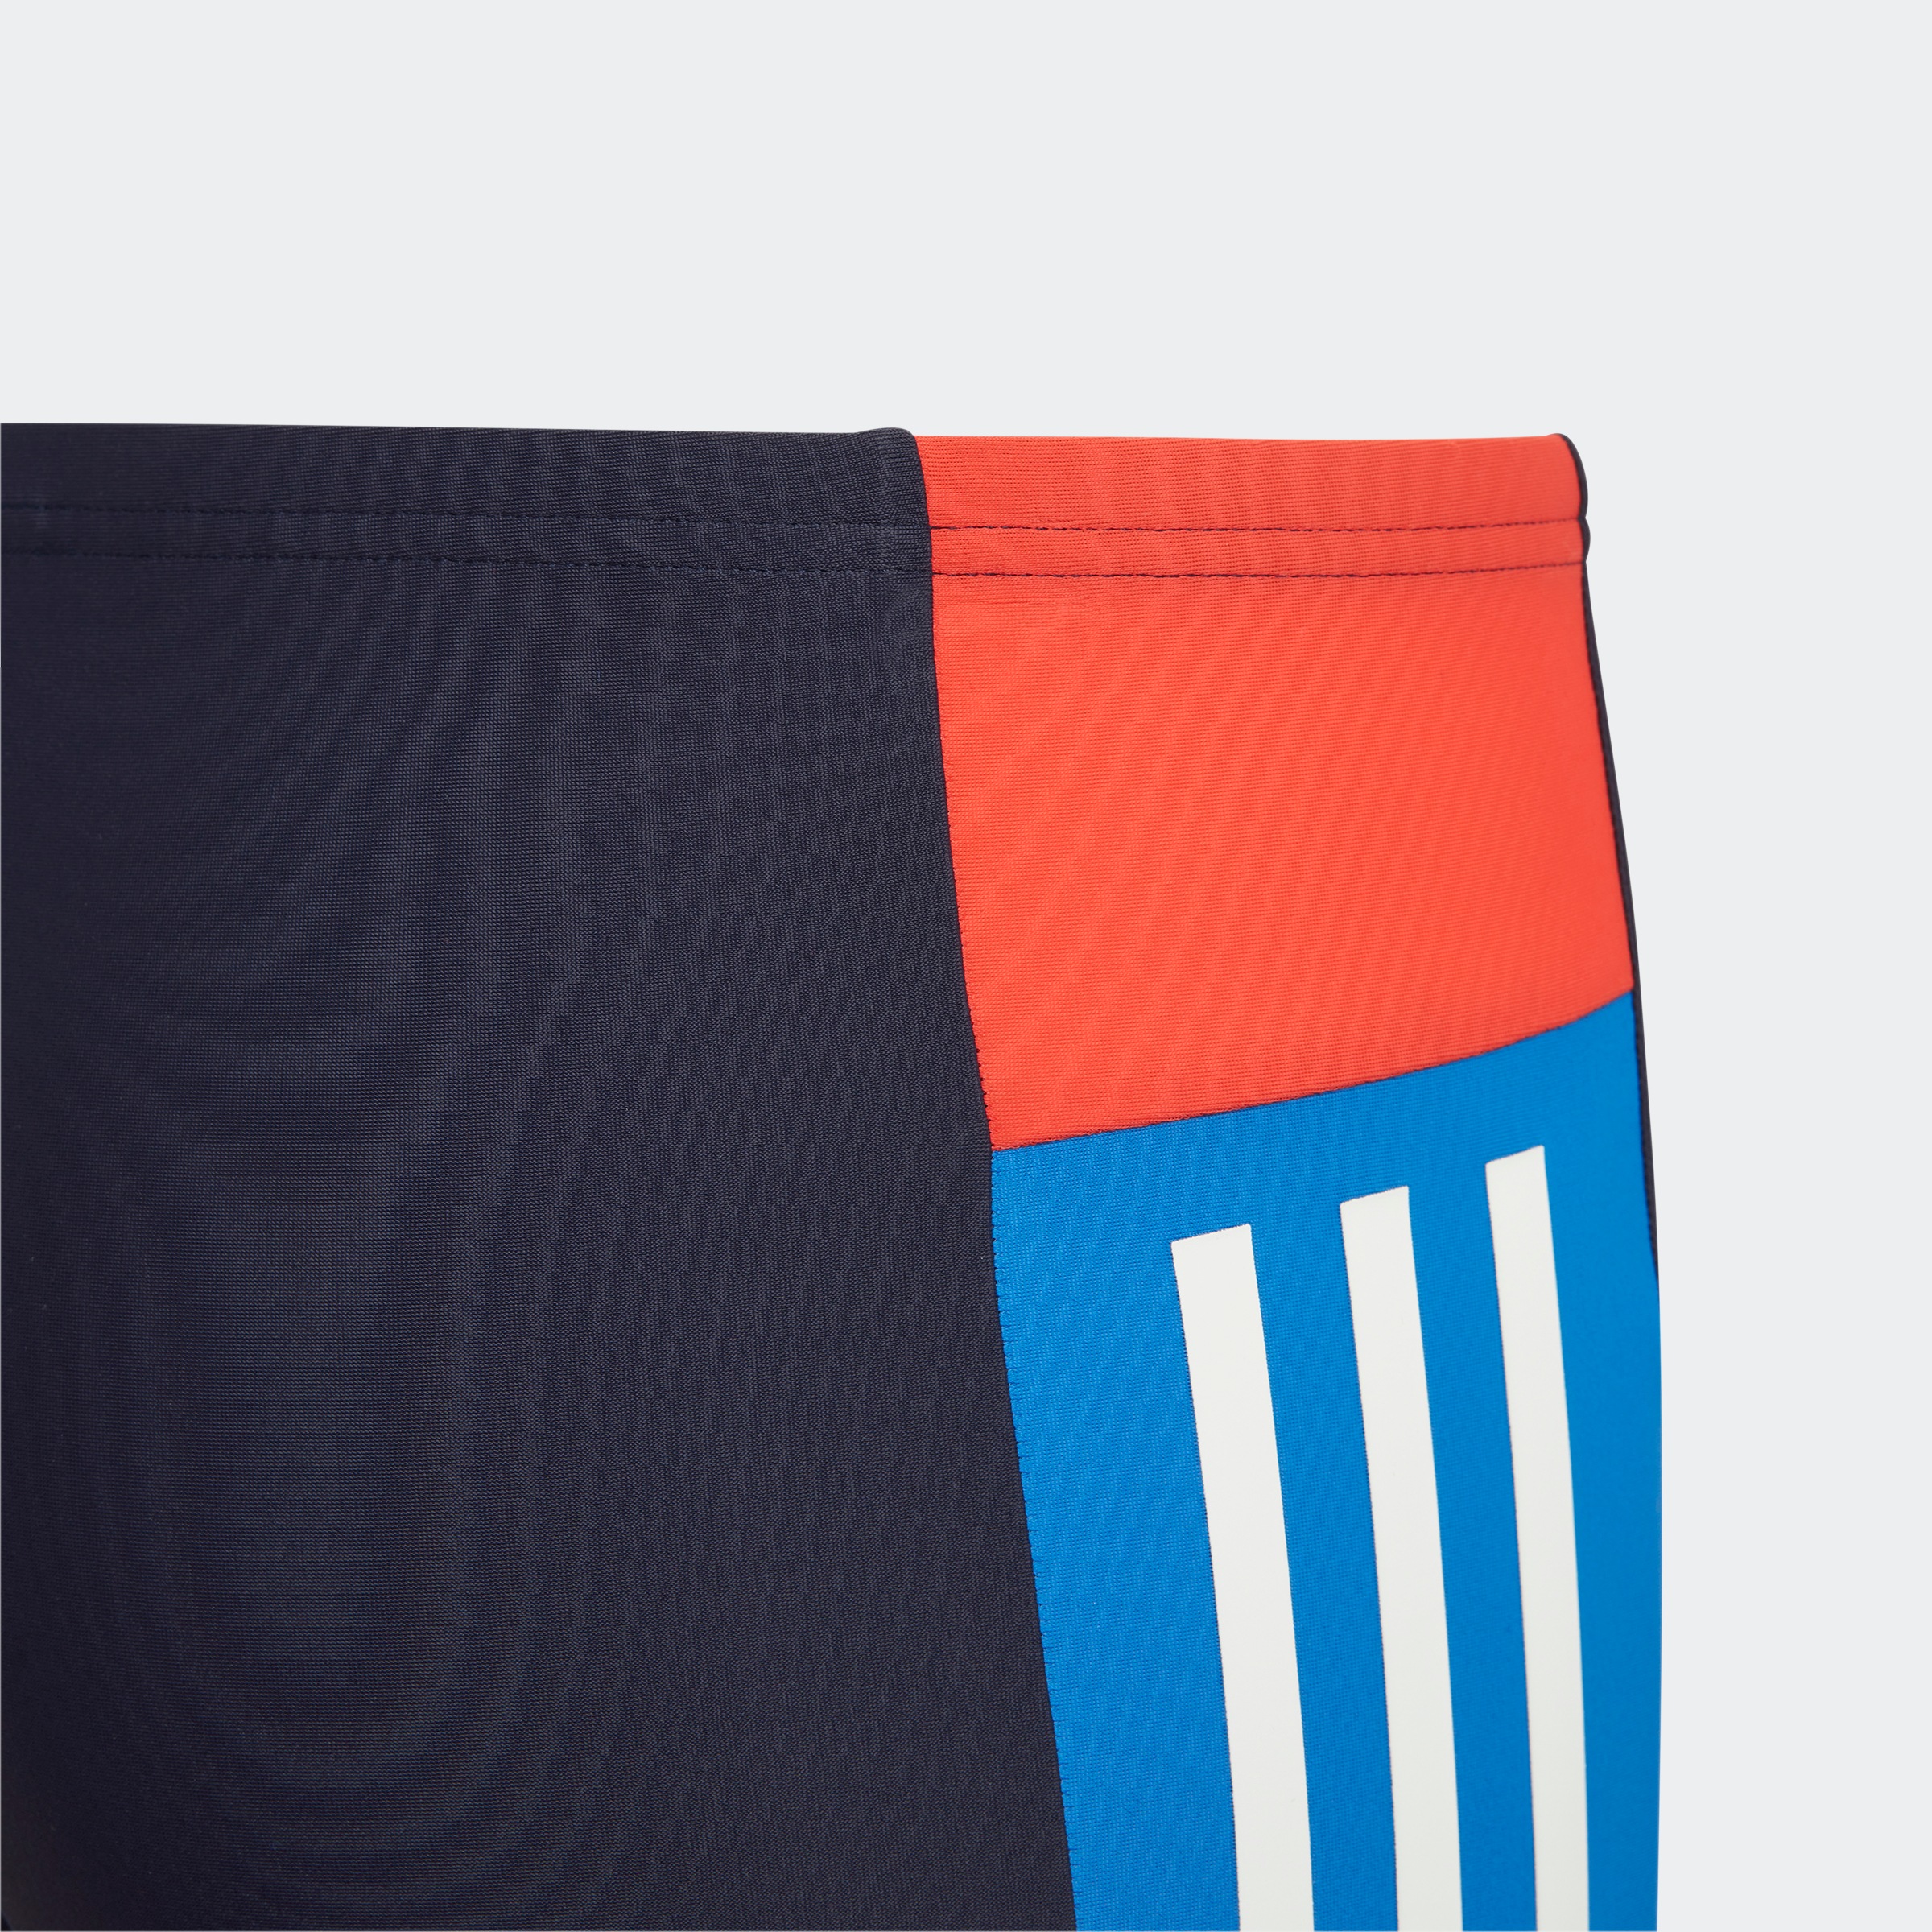 bei adidas 3S BOXER«, (1 »CB Performance St.) Badehose